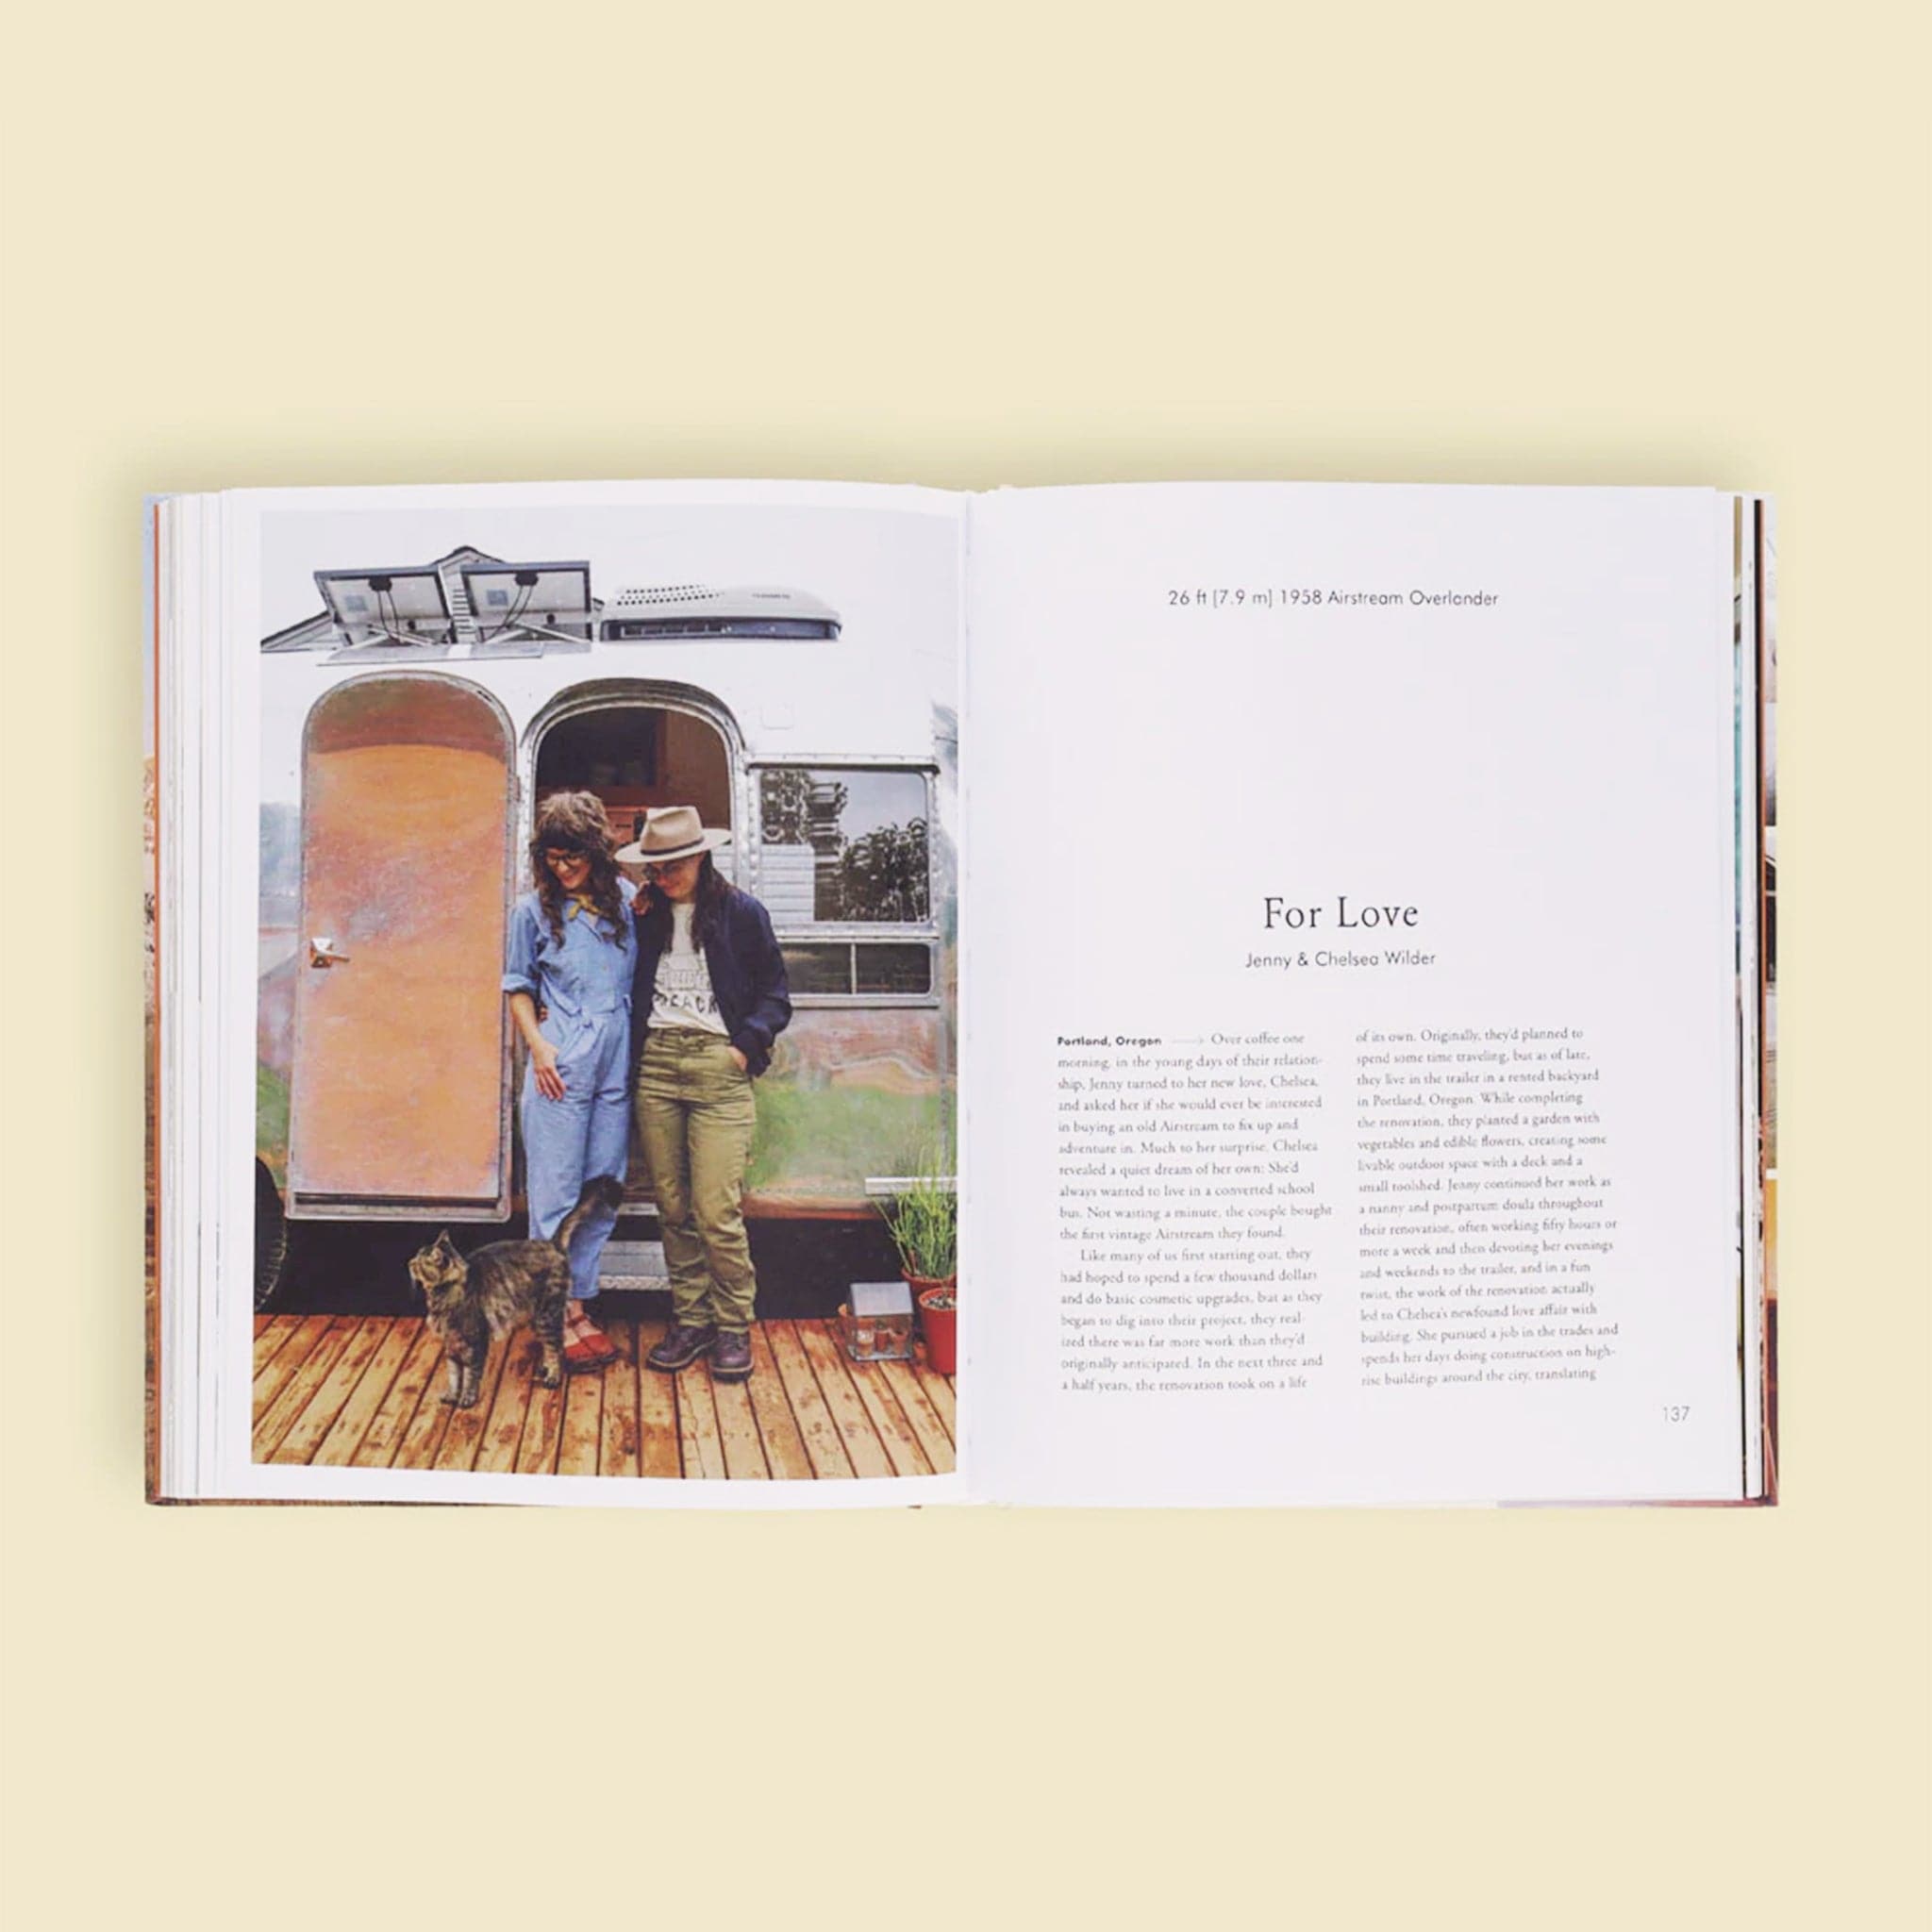 Two open pages of the book. The left page is filled with a sweet couple looking down at their long haired cat, posed in front of their silver airstream trailer. The right page is titles &#39;For Love&#39; and dives into the story of Jenny and Chelsea Wilder against a solid white page. 